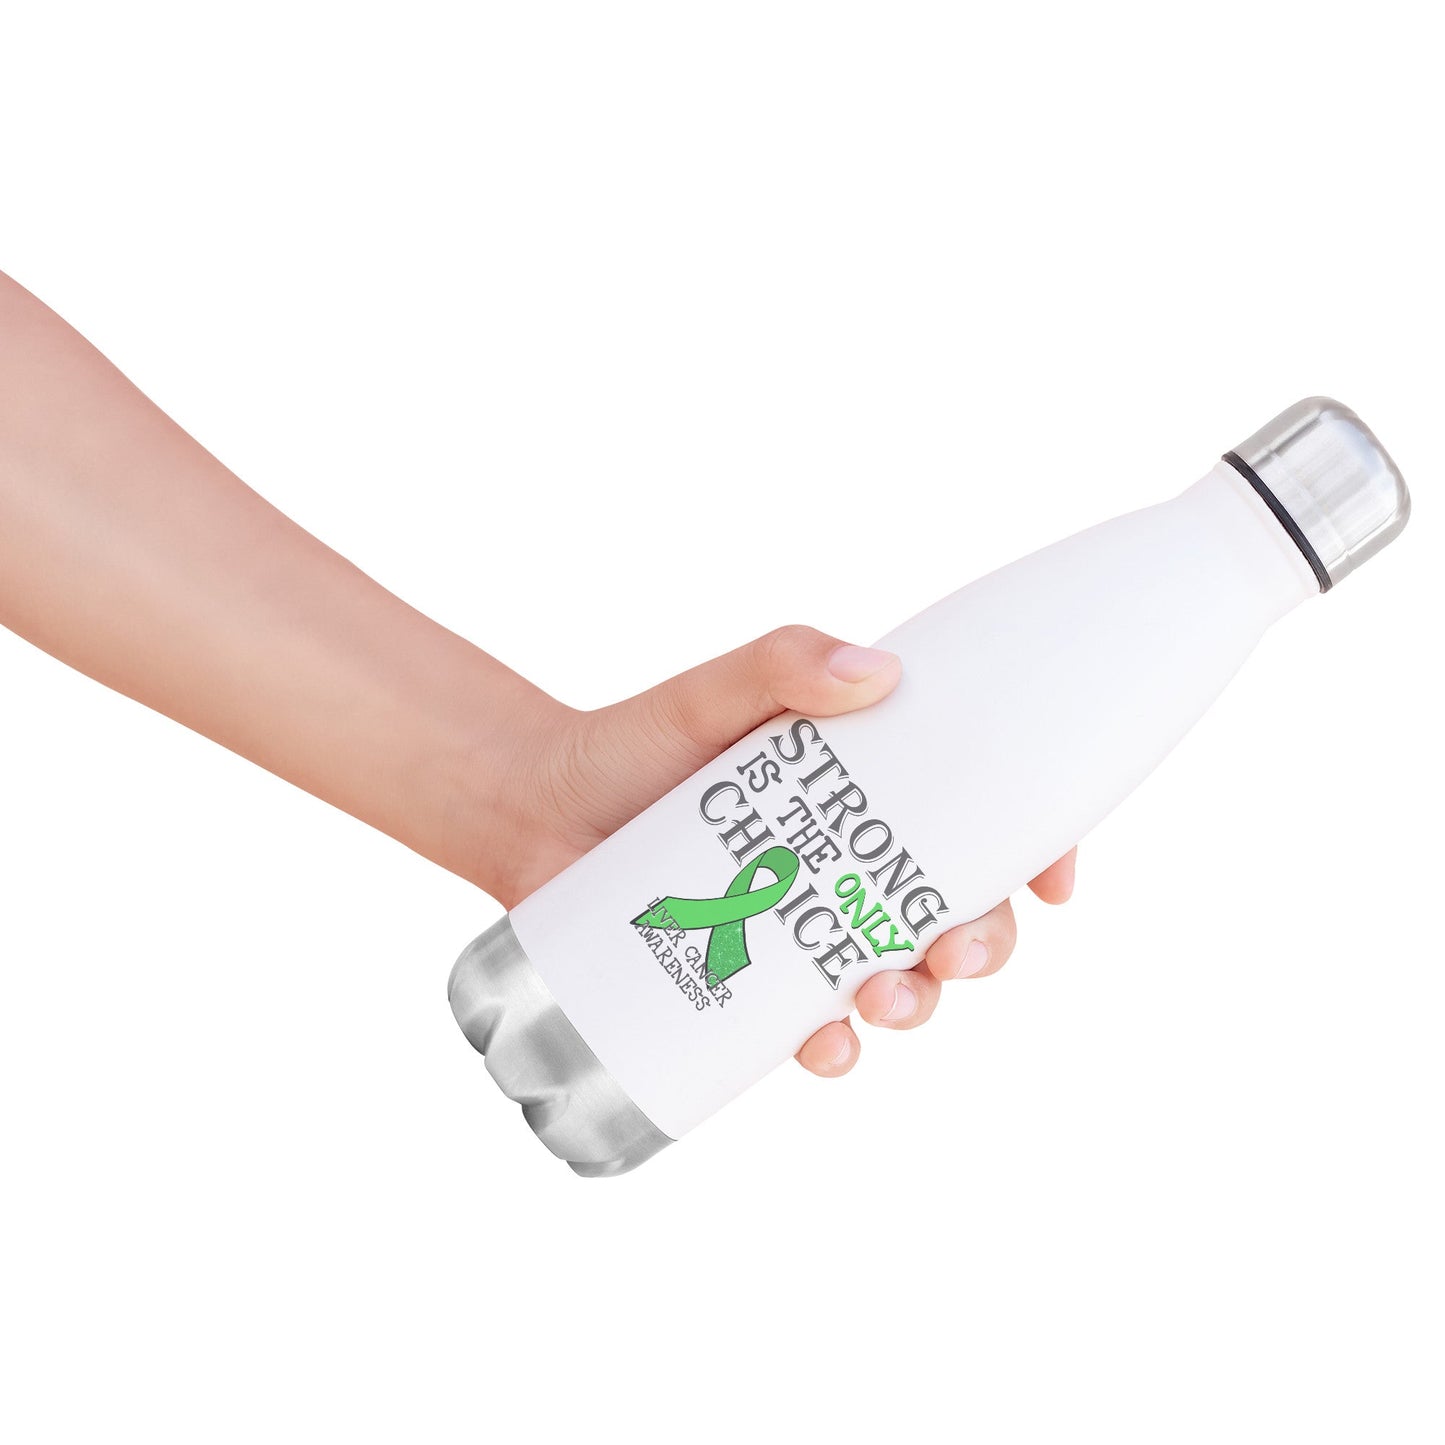 Strong is the Only Choice -Liver Cancer Awareness 20oz Insulated Water Bottle |x|